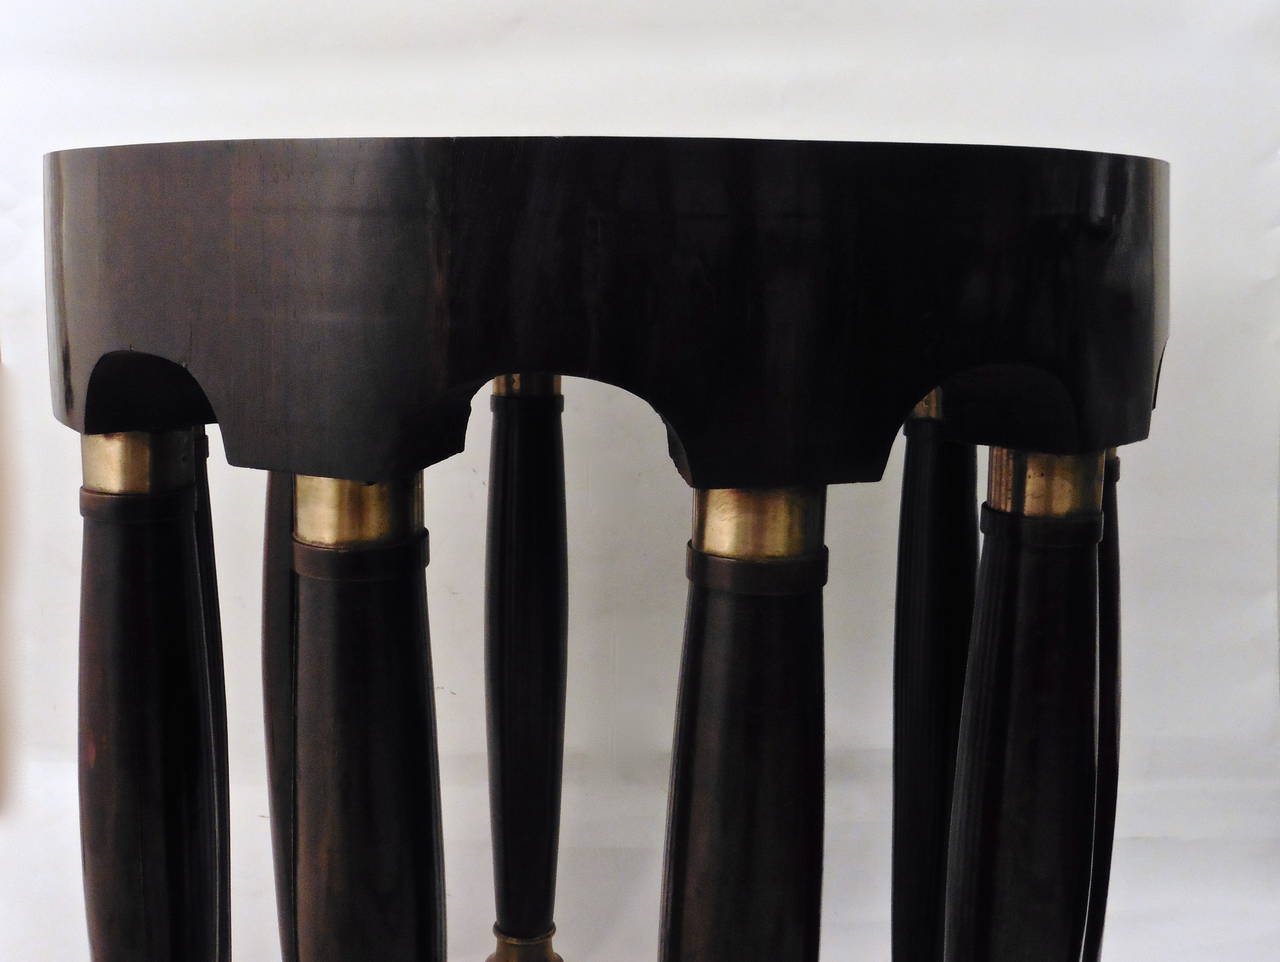 A wonderful Austrian Secessionist movement elephant table, attributed to Adolf Loos, circa 1900. The circular polished rosewood top above a Portico Frieze, supported by ten elegantly designed column legs with brass mounts.